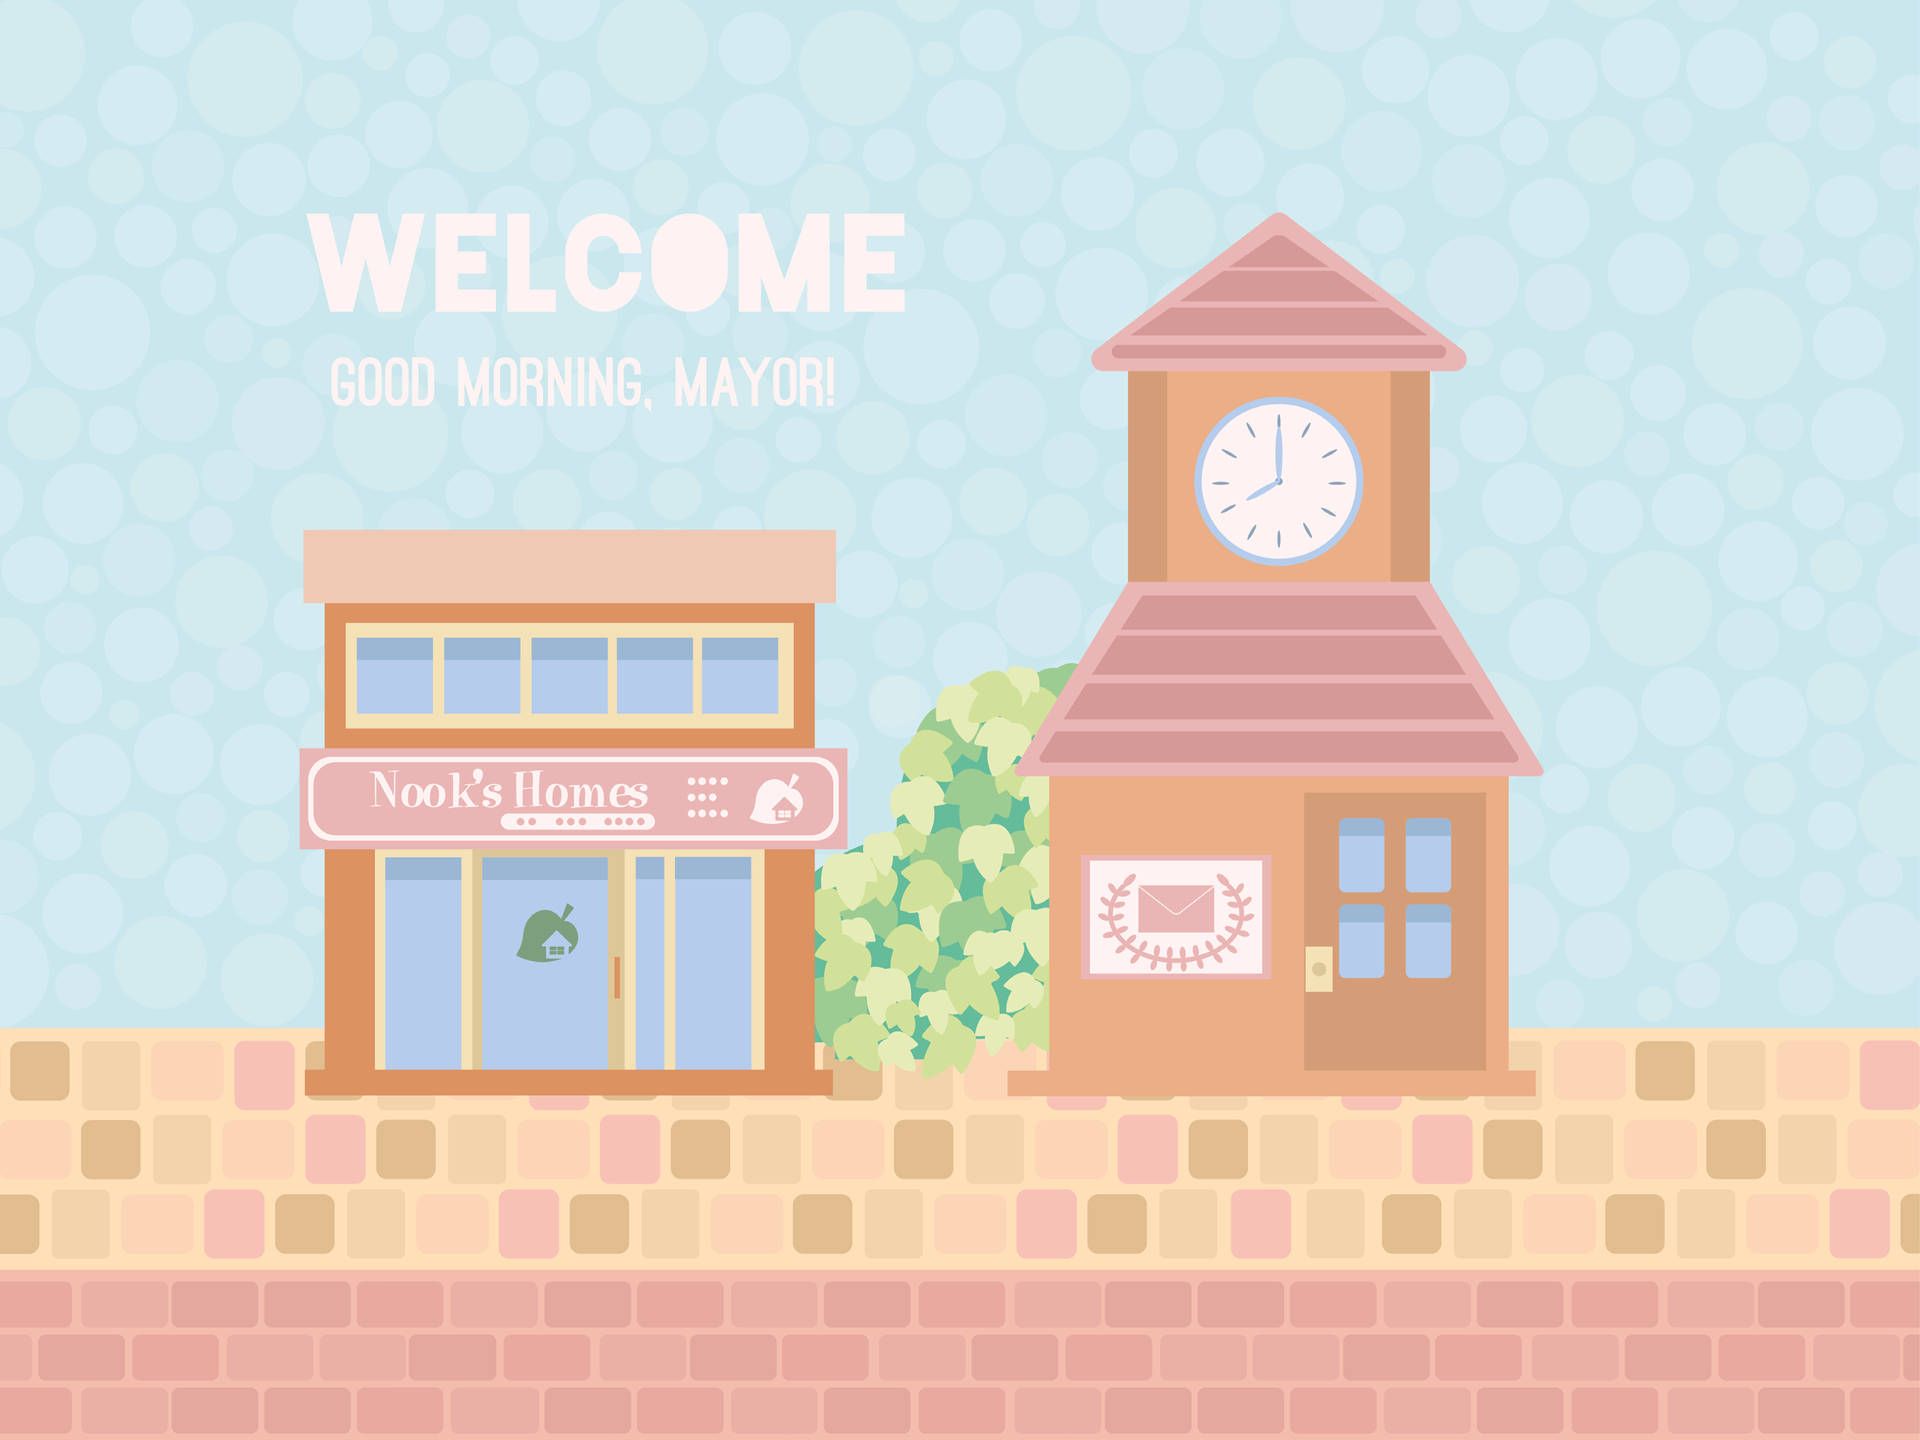 A cartoon style building with clock and flowers - Animal Crossing